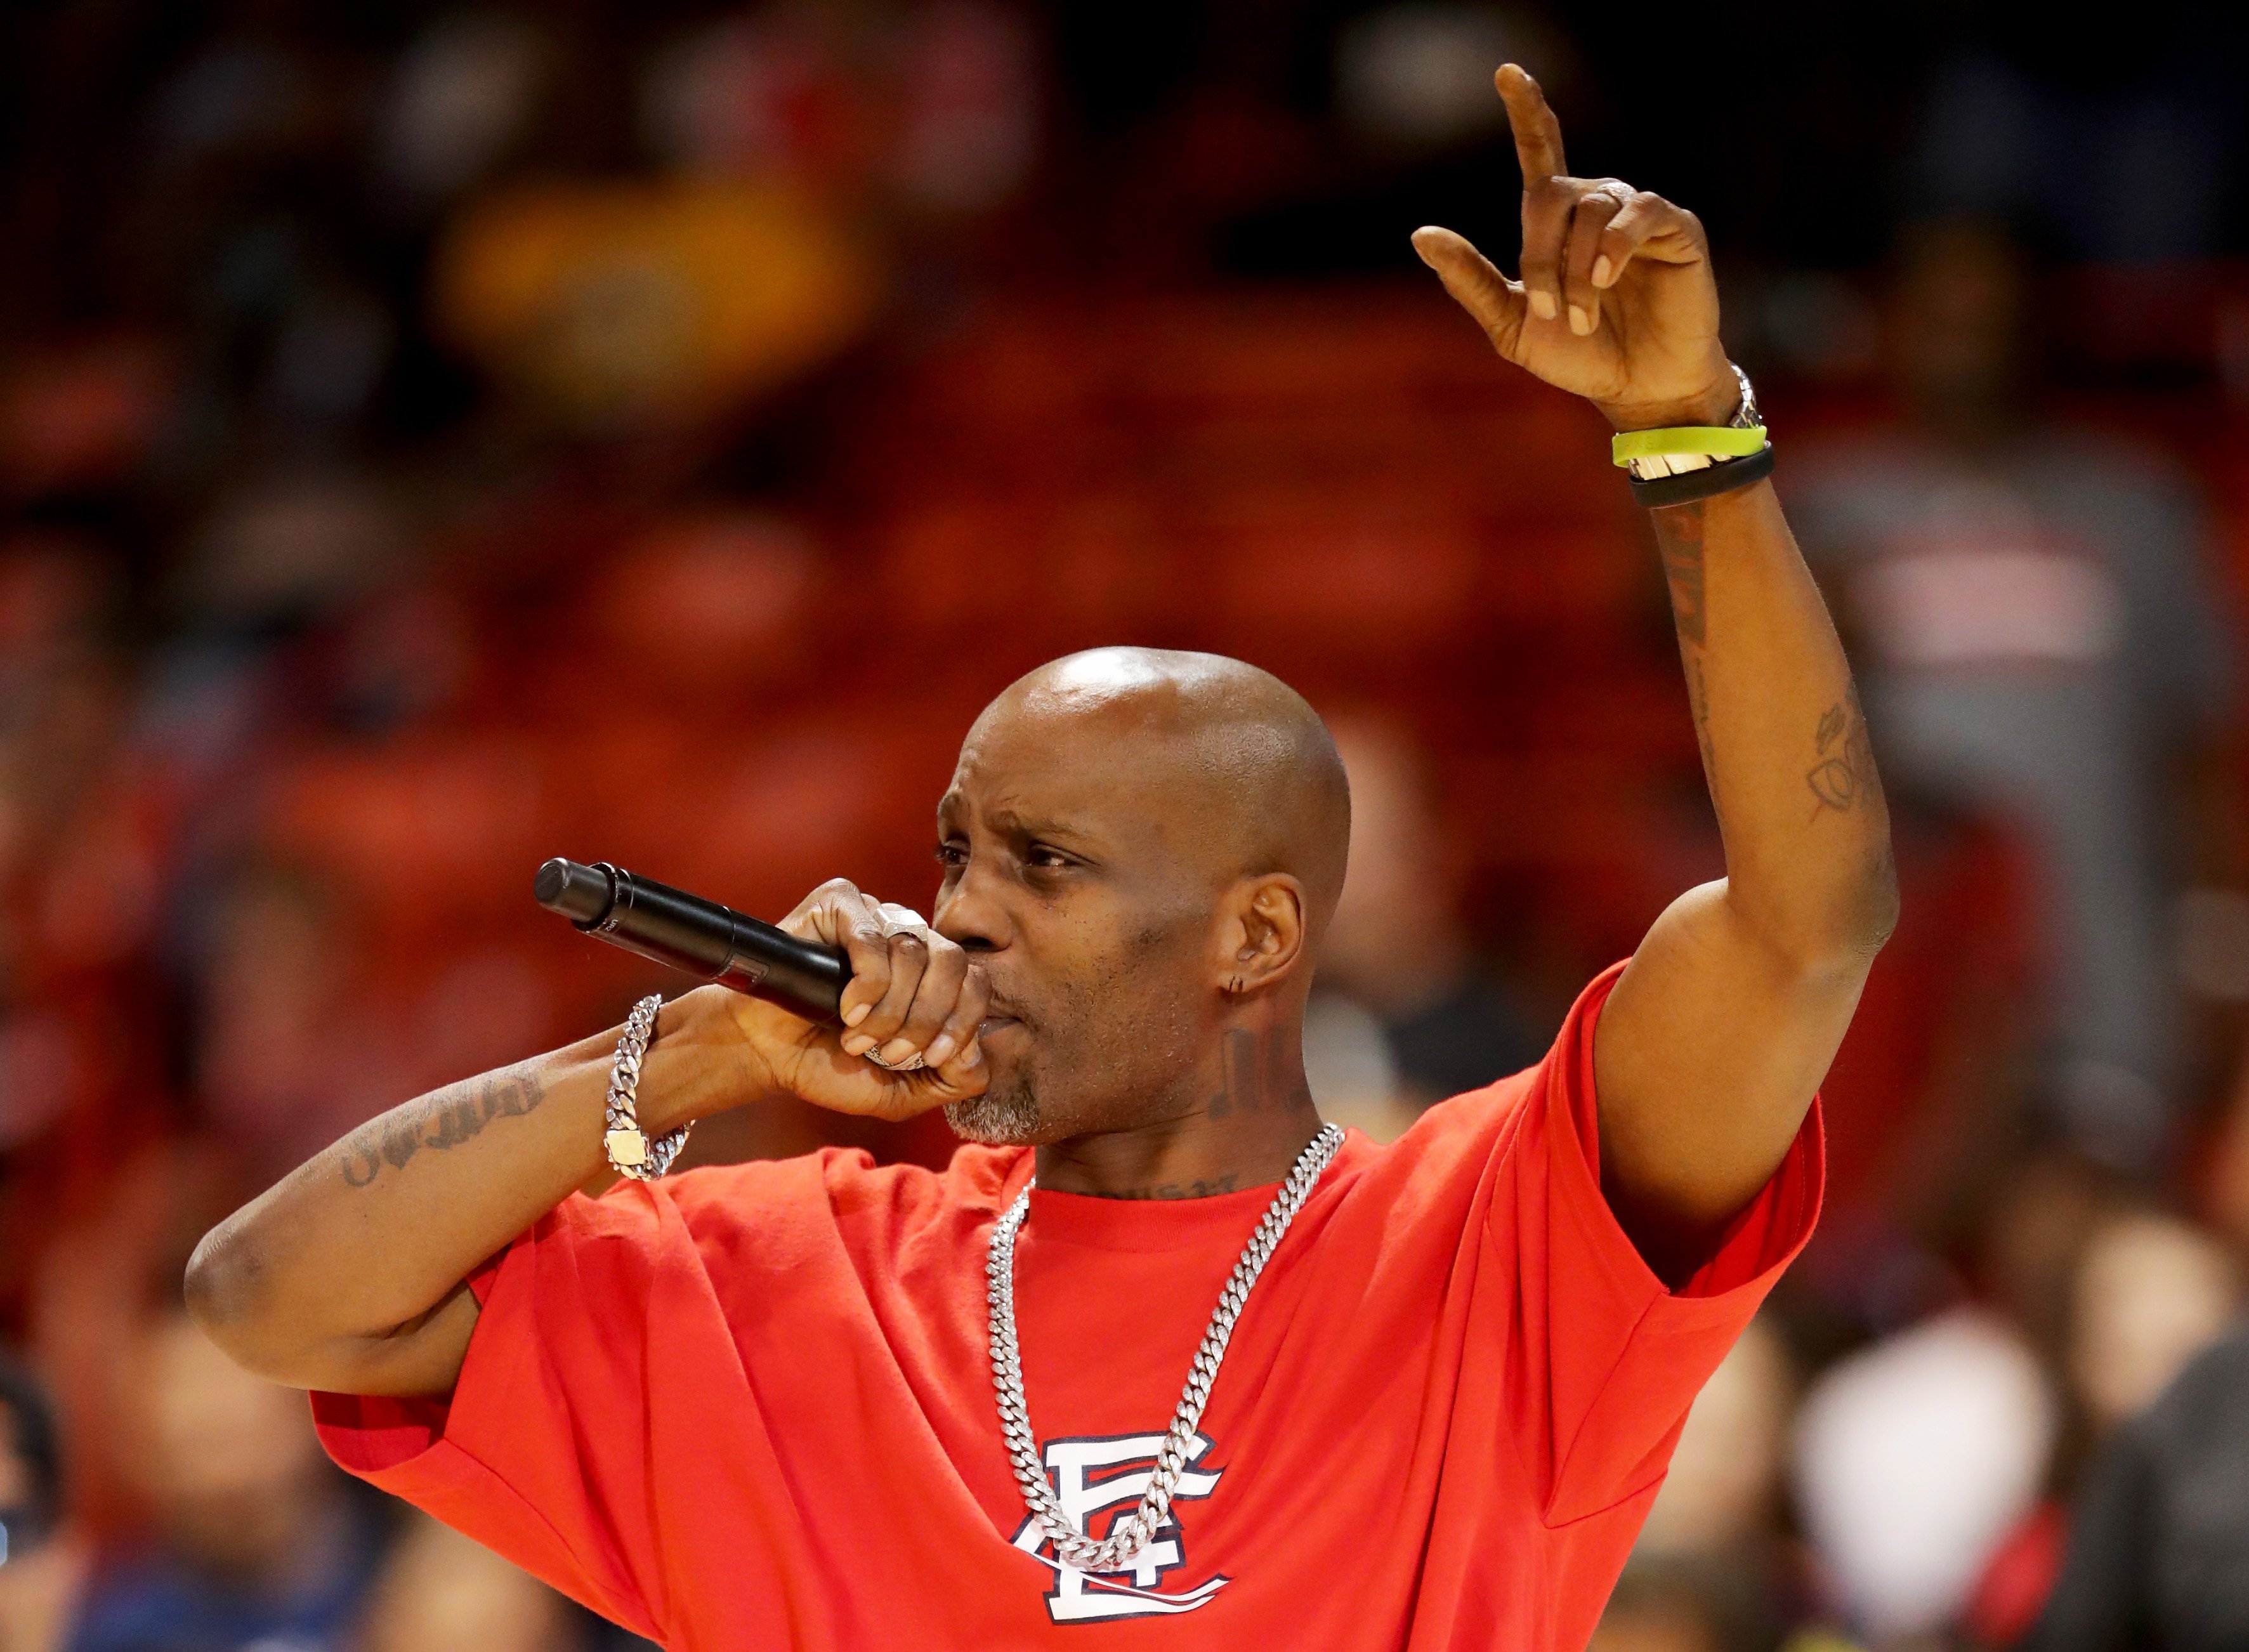 DMX rapping at a basketball game